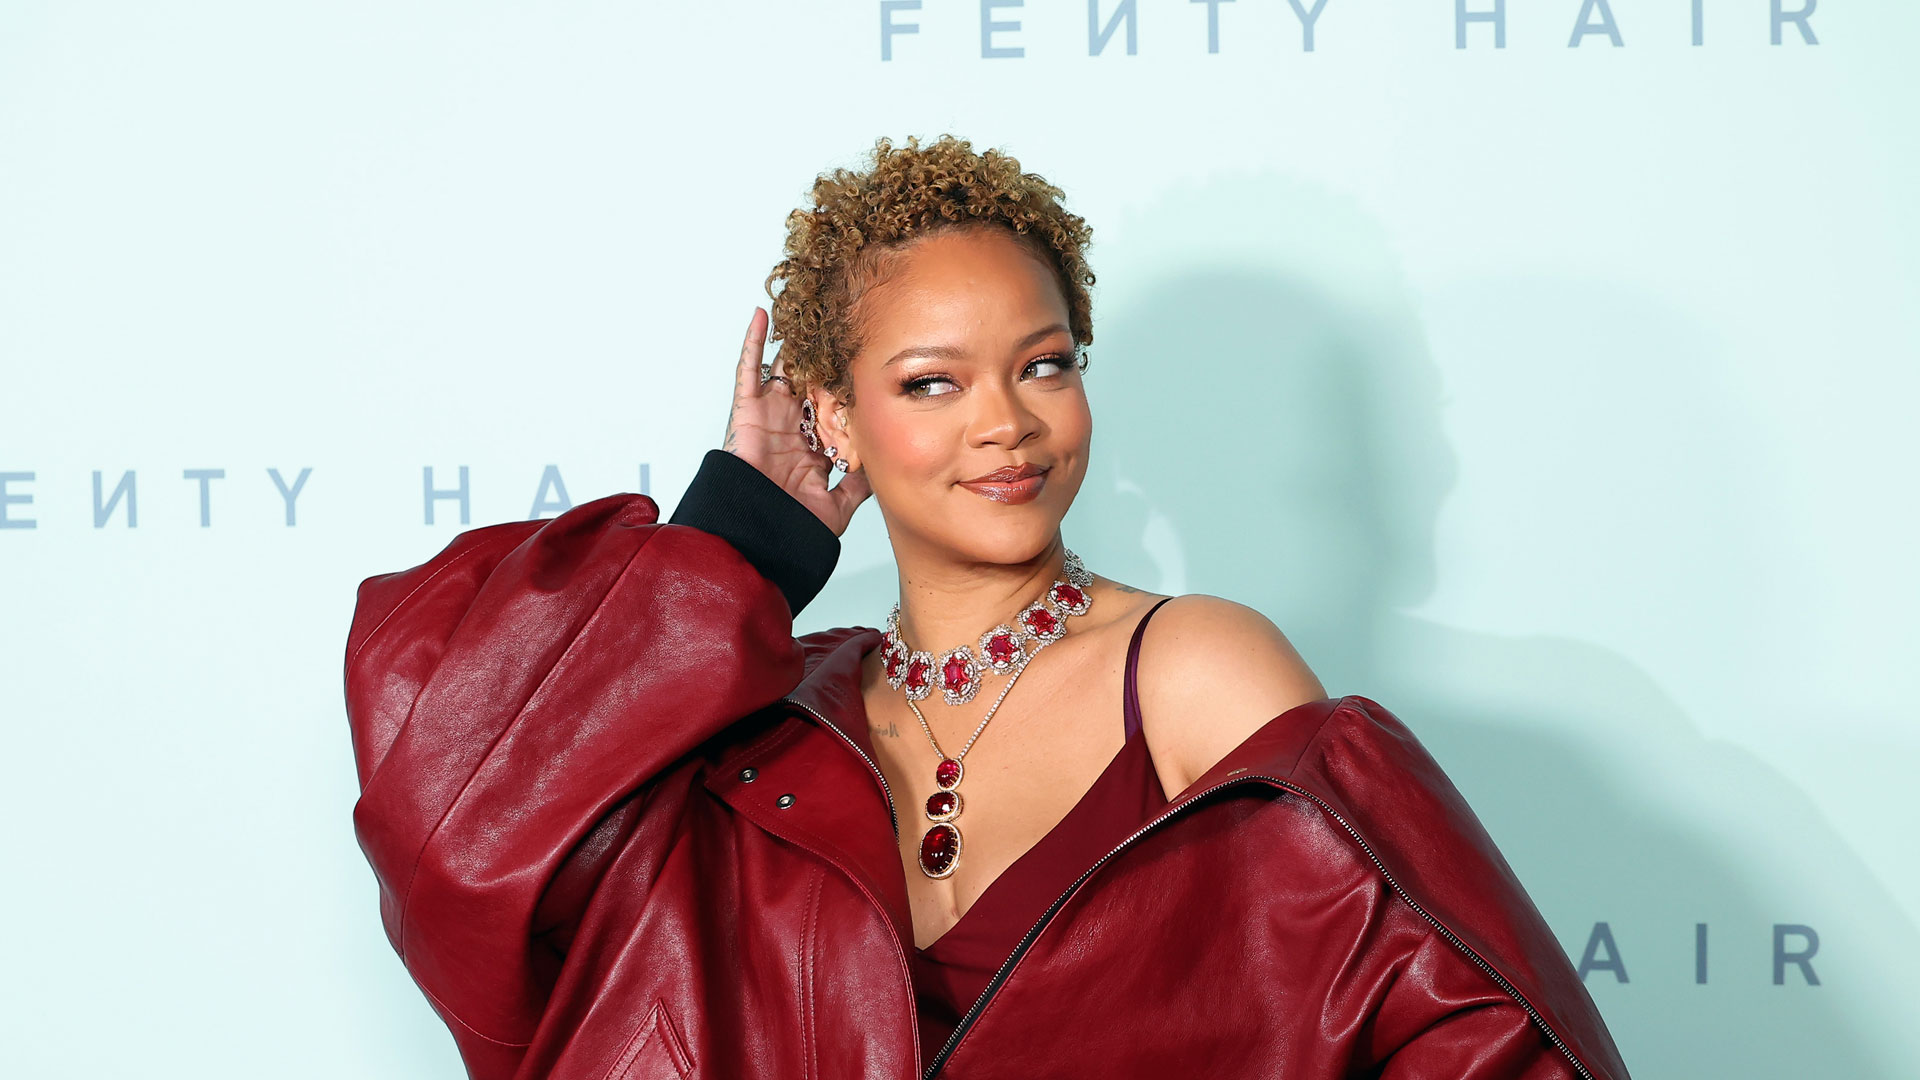 My 4 essential tips if you’re suffering from postpartum hair loss like Rihanna – a few natural tricks can grow it back [Video]